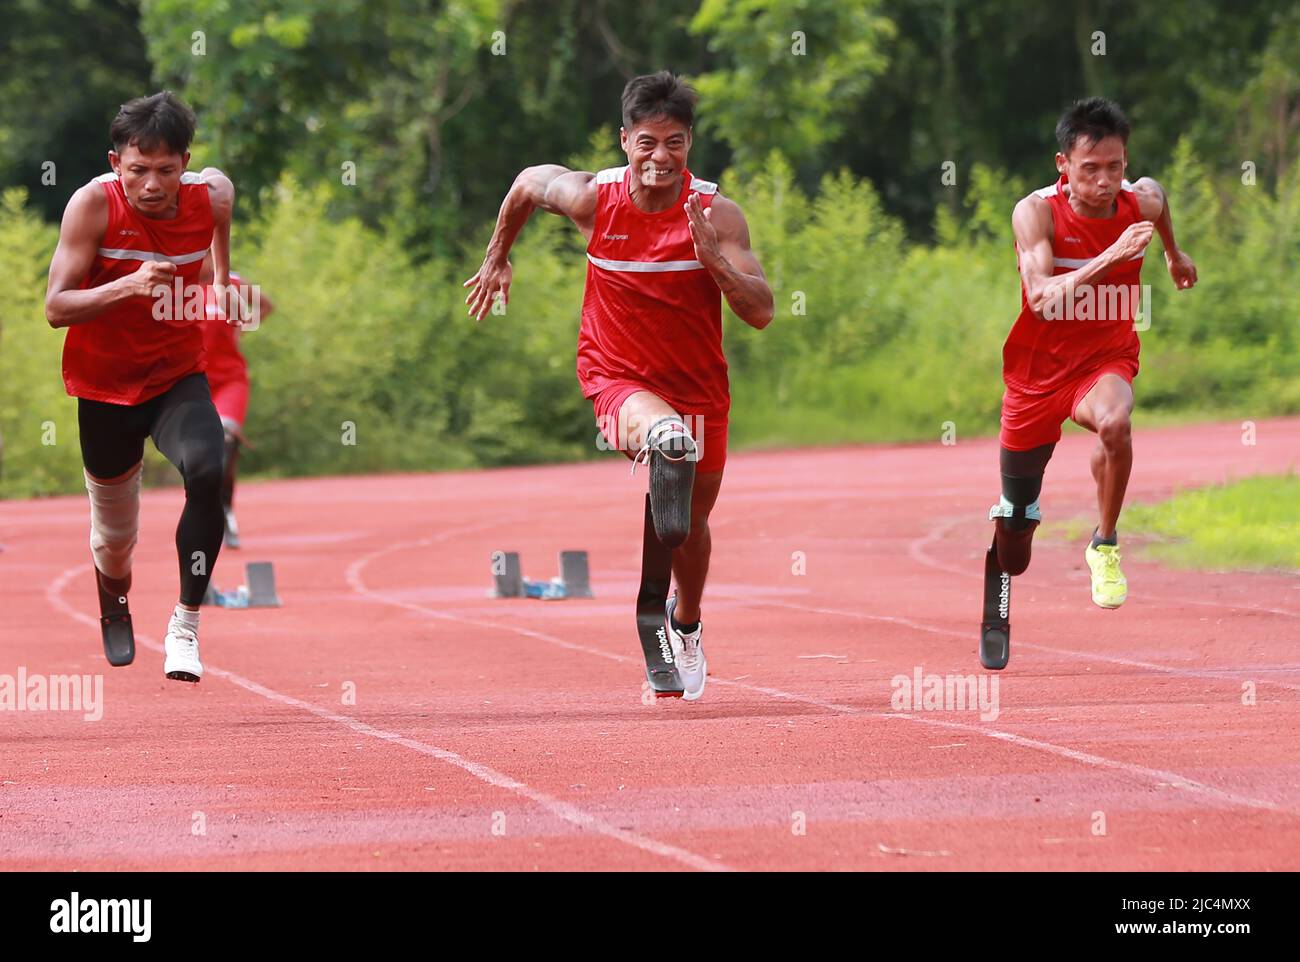 Yangon, Myanmar. 9th June, 2022. Myanmar's athletes train for the upcoming 2022 ASEAN Para Games in Yangon, Myanmar, June 9, 2022. Myanmar will send a contingent of over 90 athletes with disabilities to compete at the upcoming 2022 ASEAN Para Games, Myo Myint, Vice President of the Myanmar Paralympic Sports Federation (MPSF), told Xinhua on Thursday. Credit: U Aung/Xinhua/Alamy Live News Stock Photo